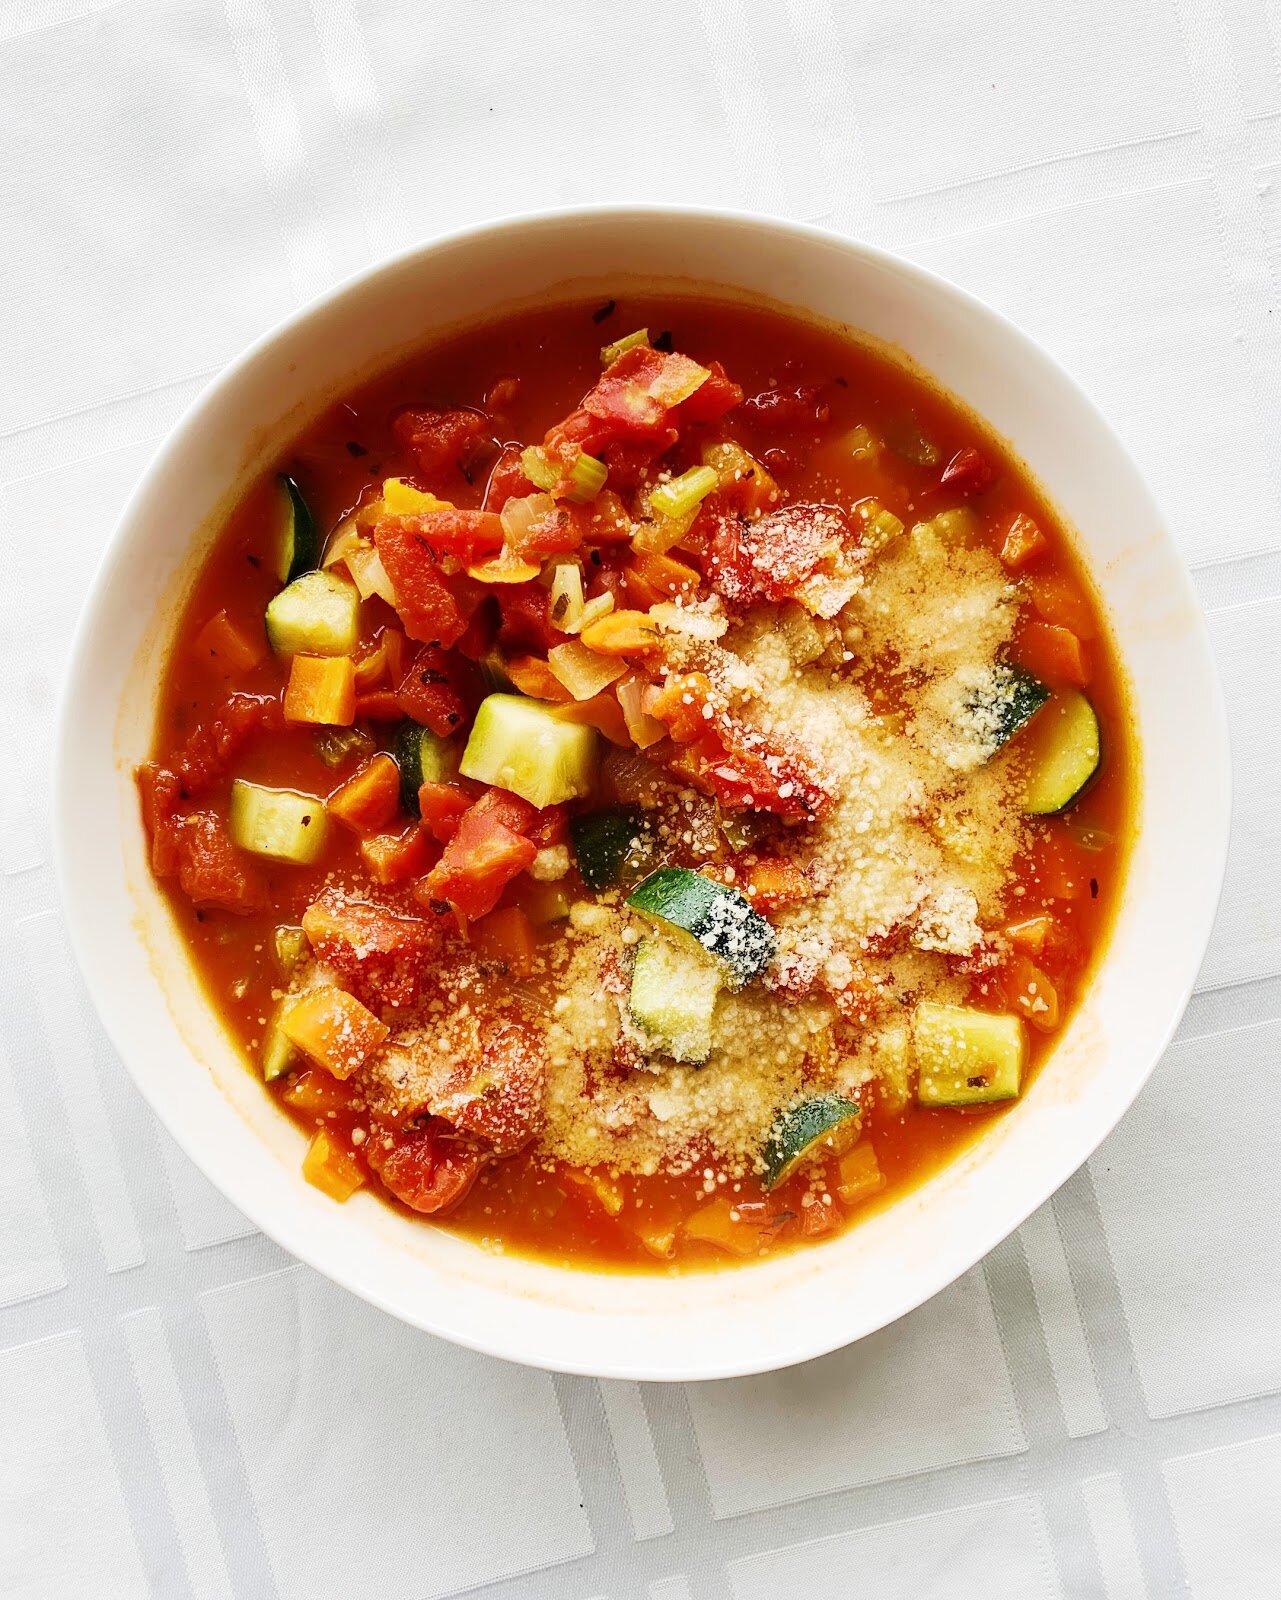 Soups to eat when you're sick